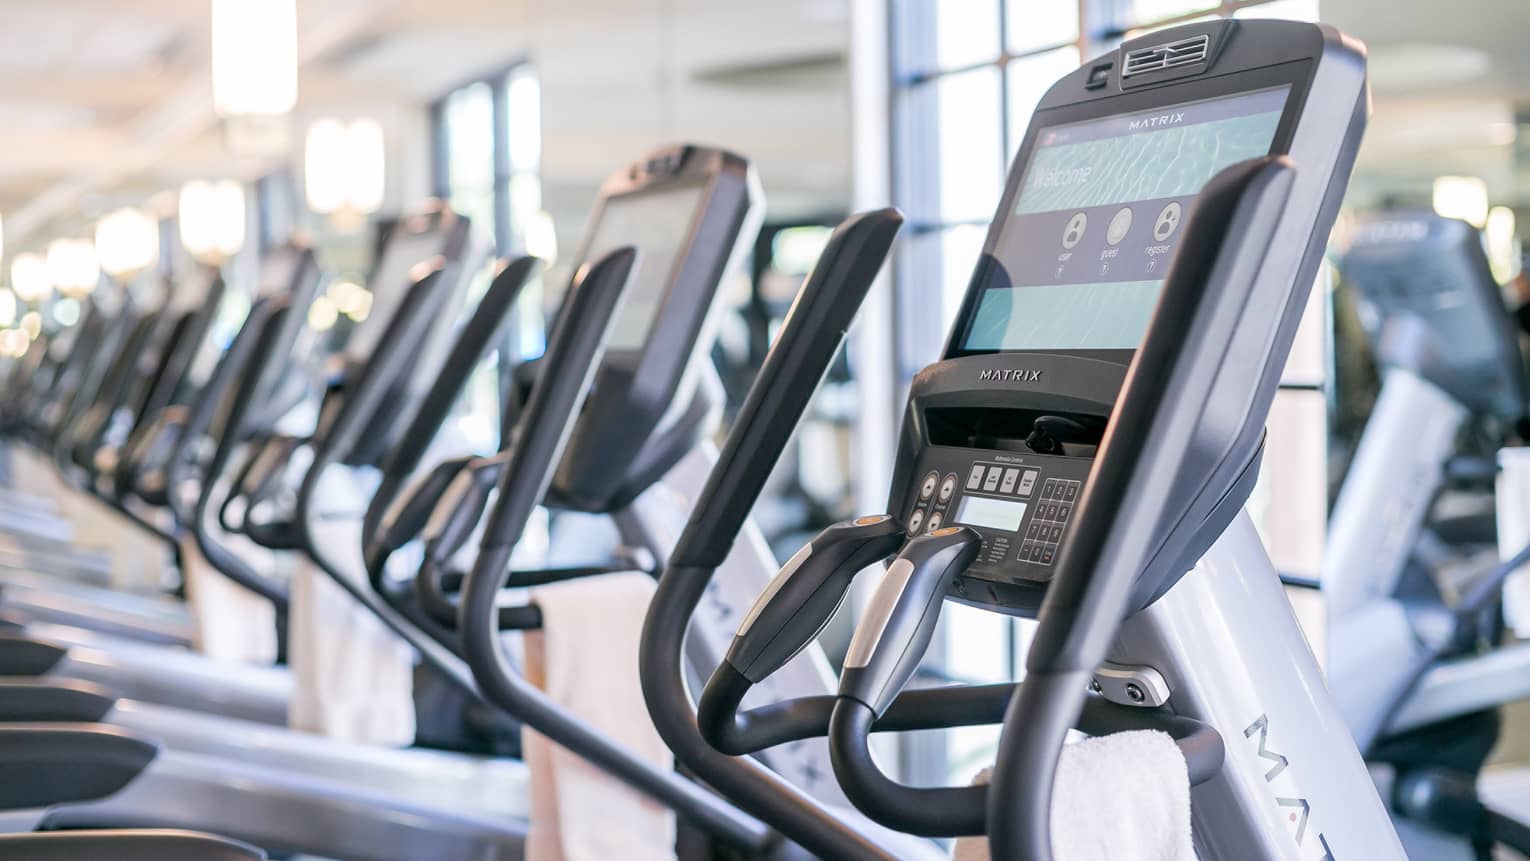 Close-up of cardio elliptical machines in a row in fitness facility